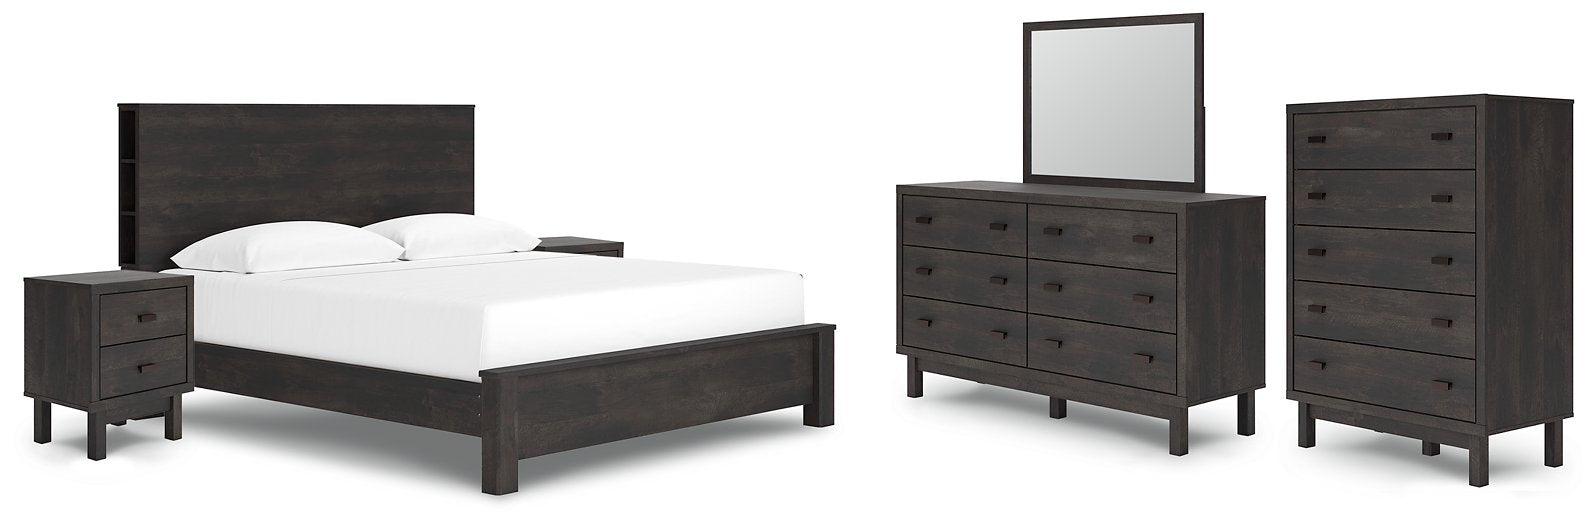 Toretto 8-Piece Bedroom Package